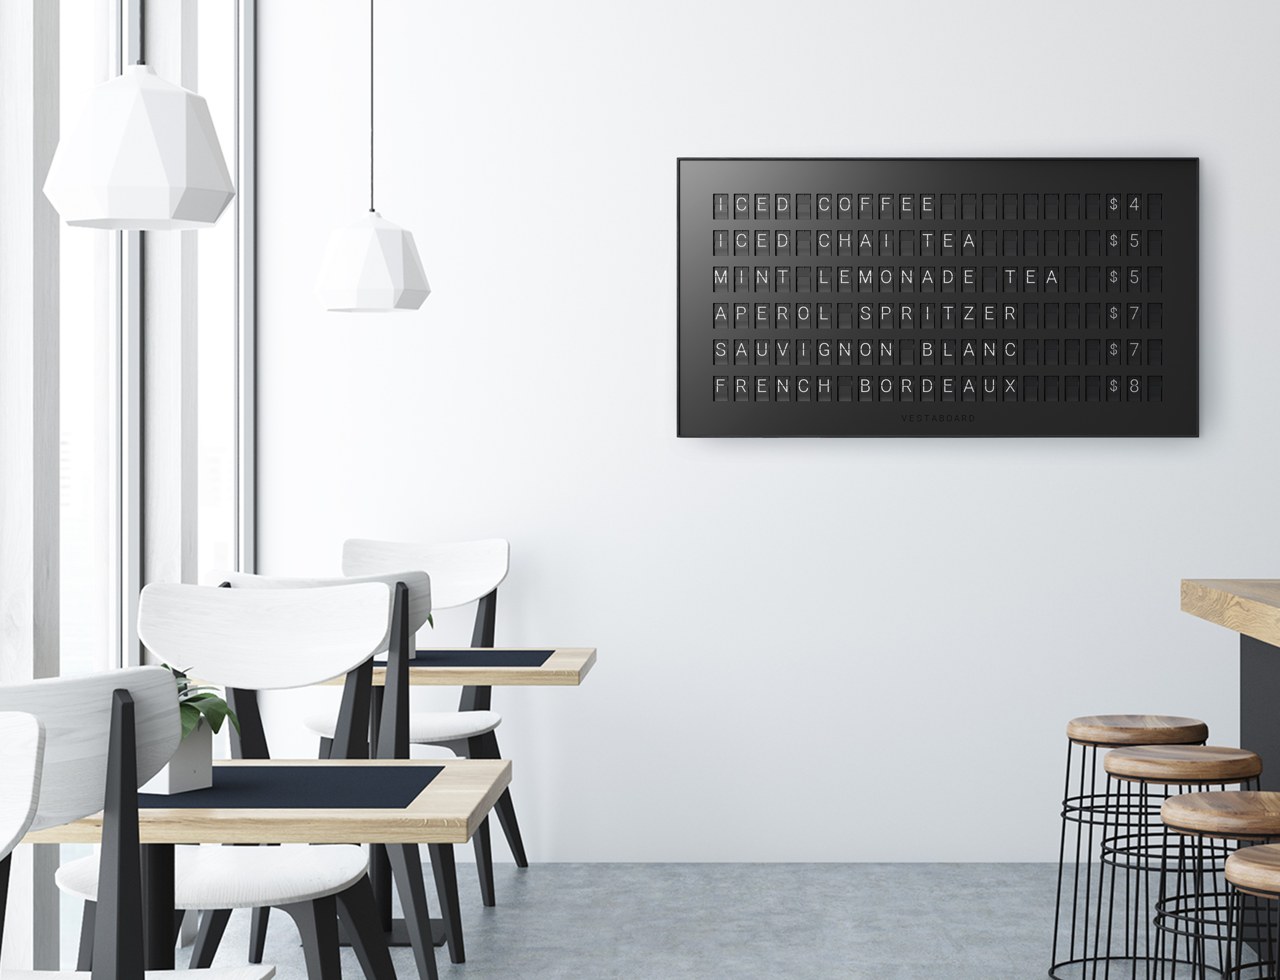 Beautiful messaging display creates a delightful way to connect with family and colleagues